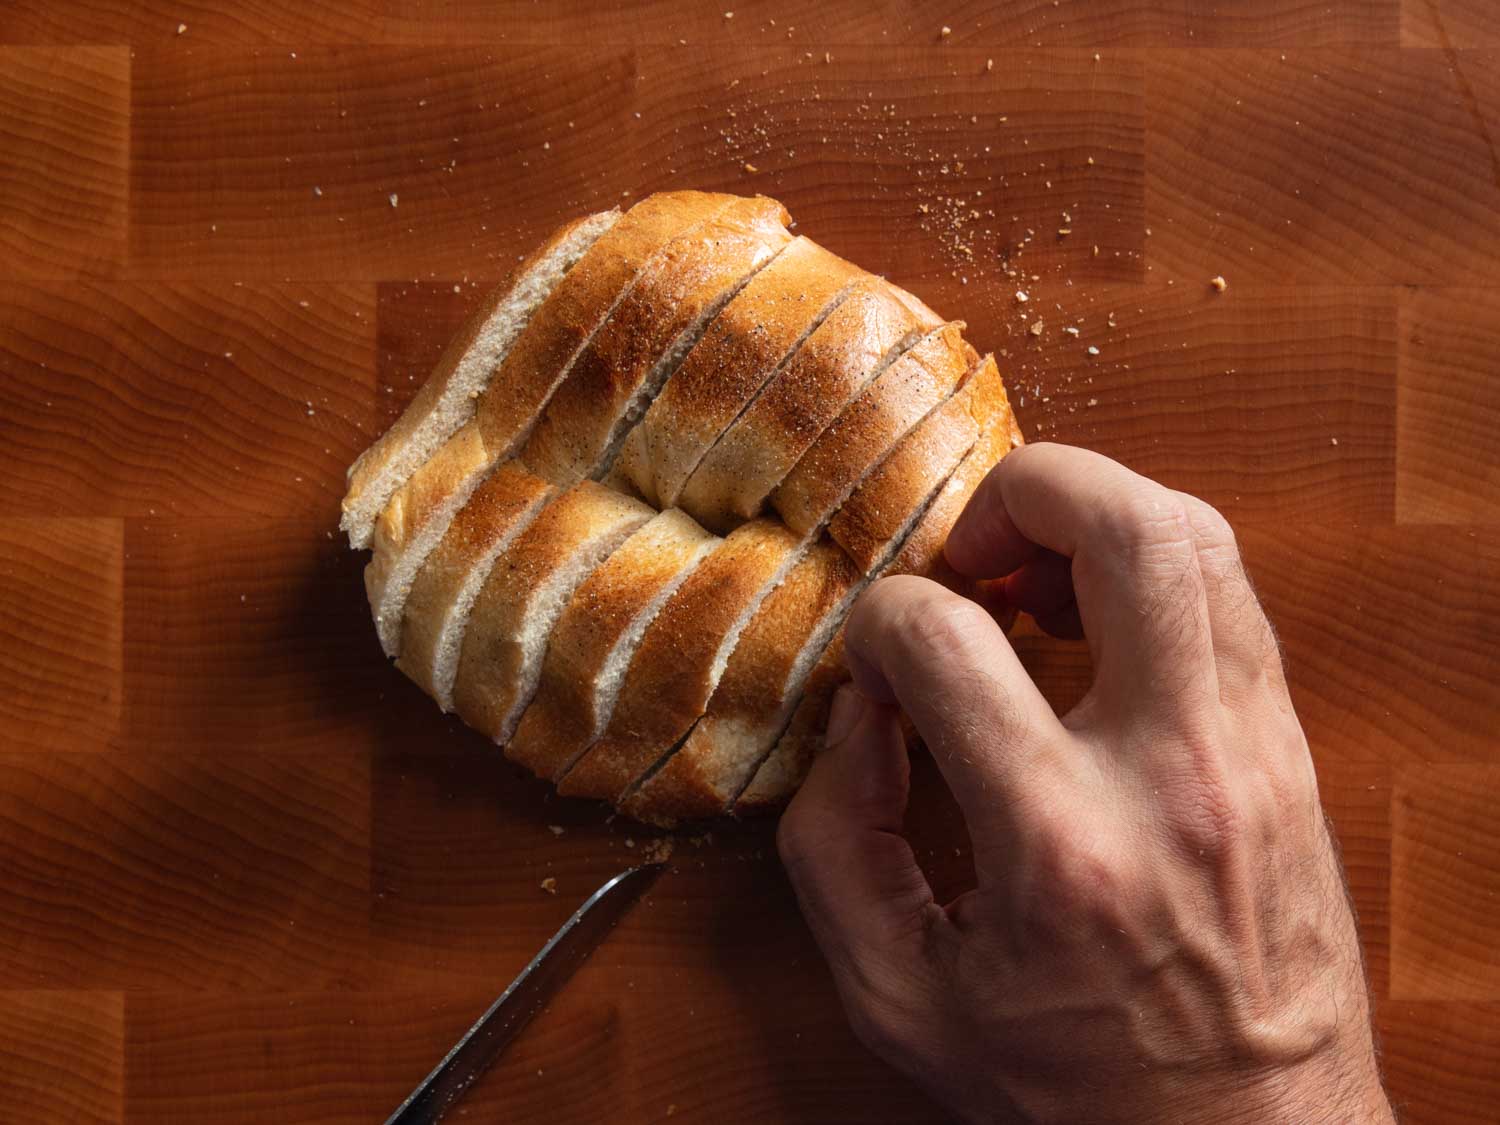 All Praise the St. Louis Bagel and Its Infinite Potential | Serious Eats